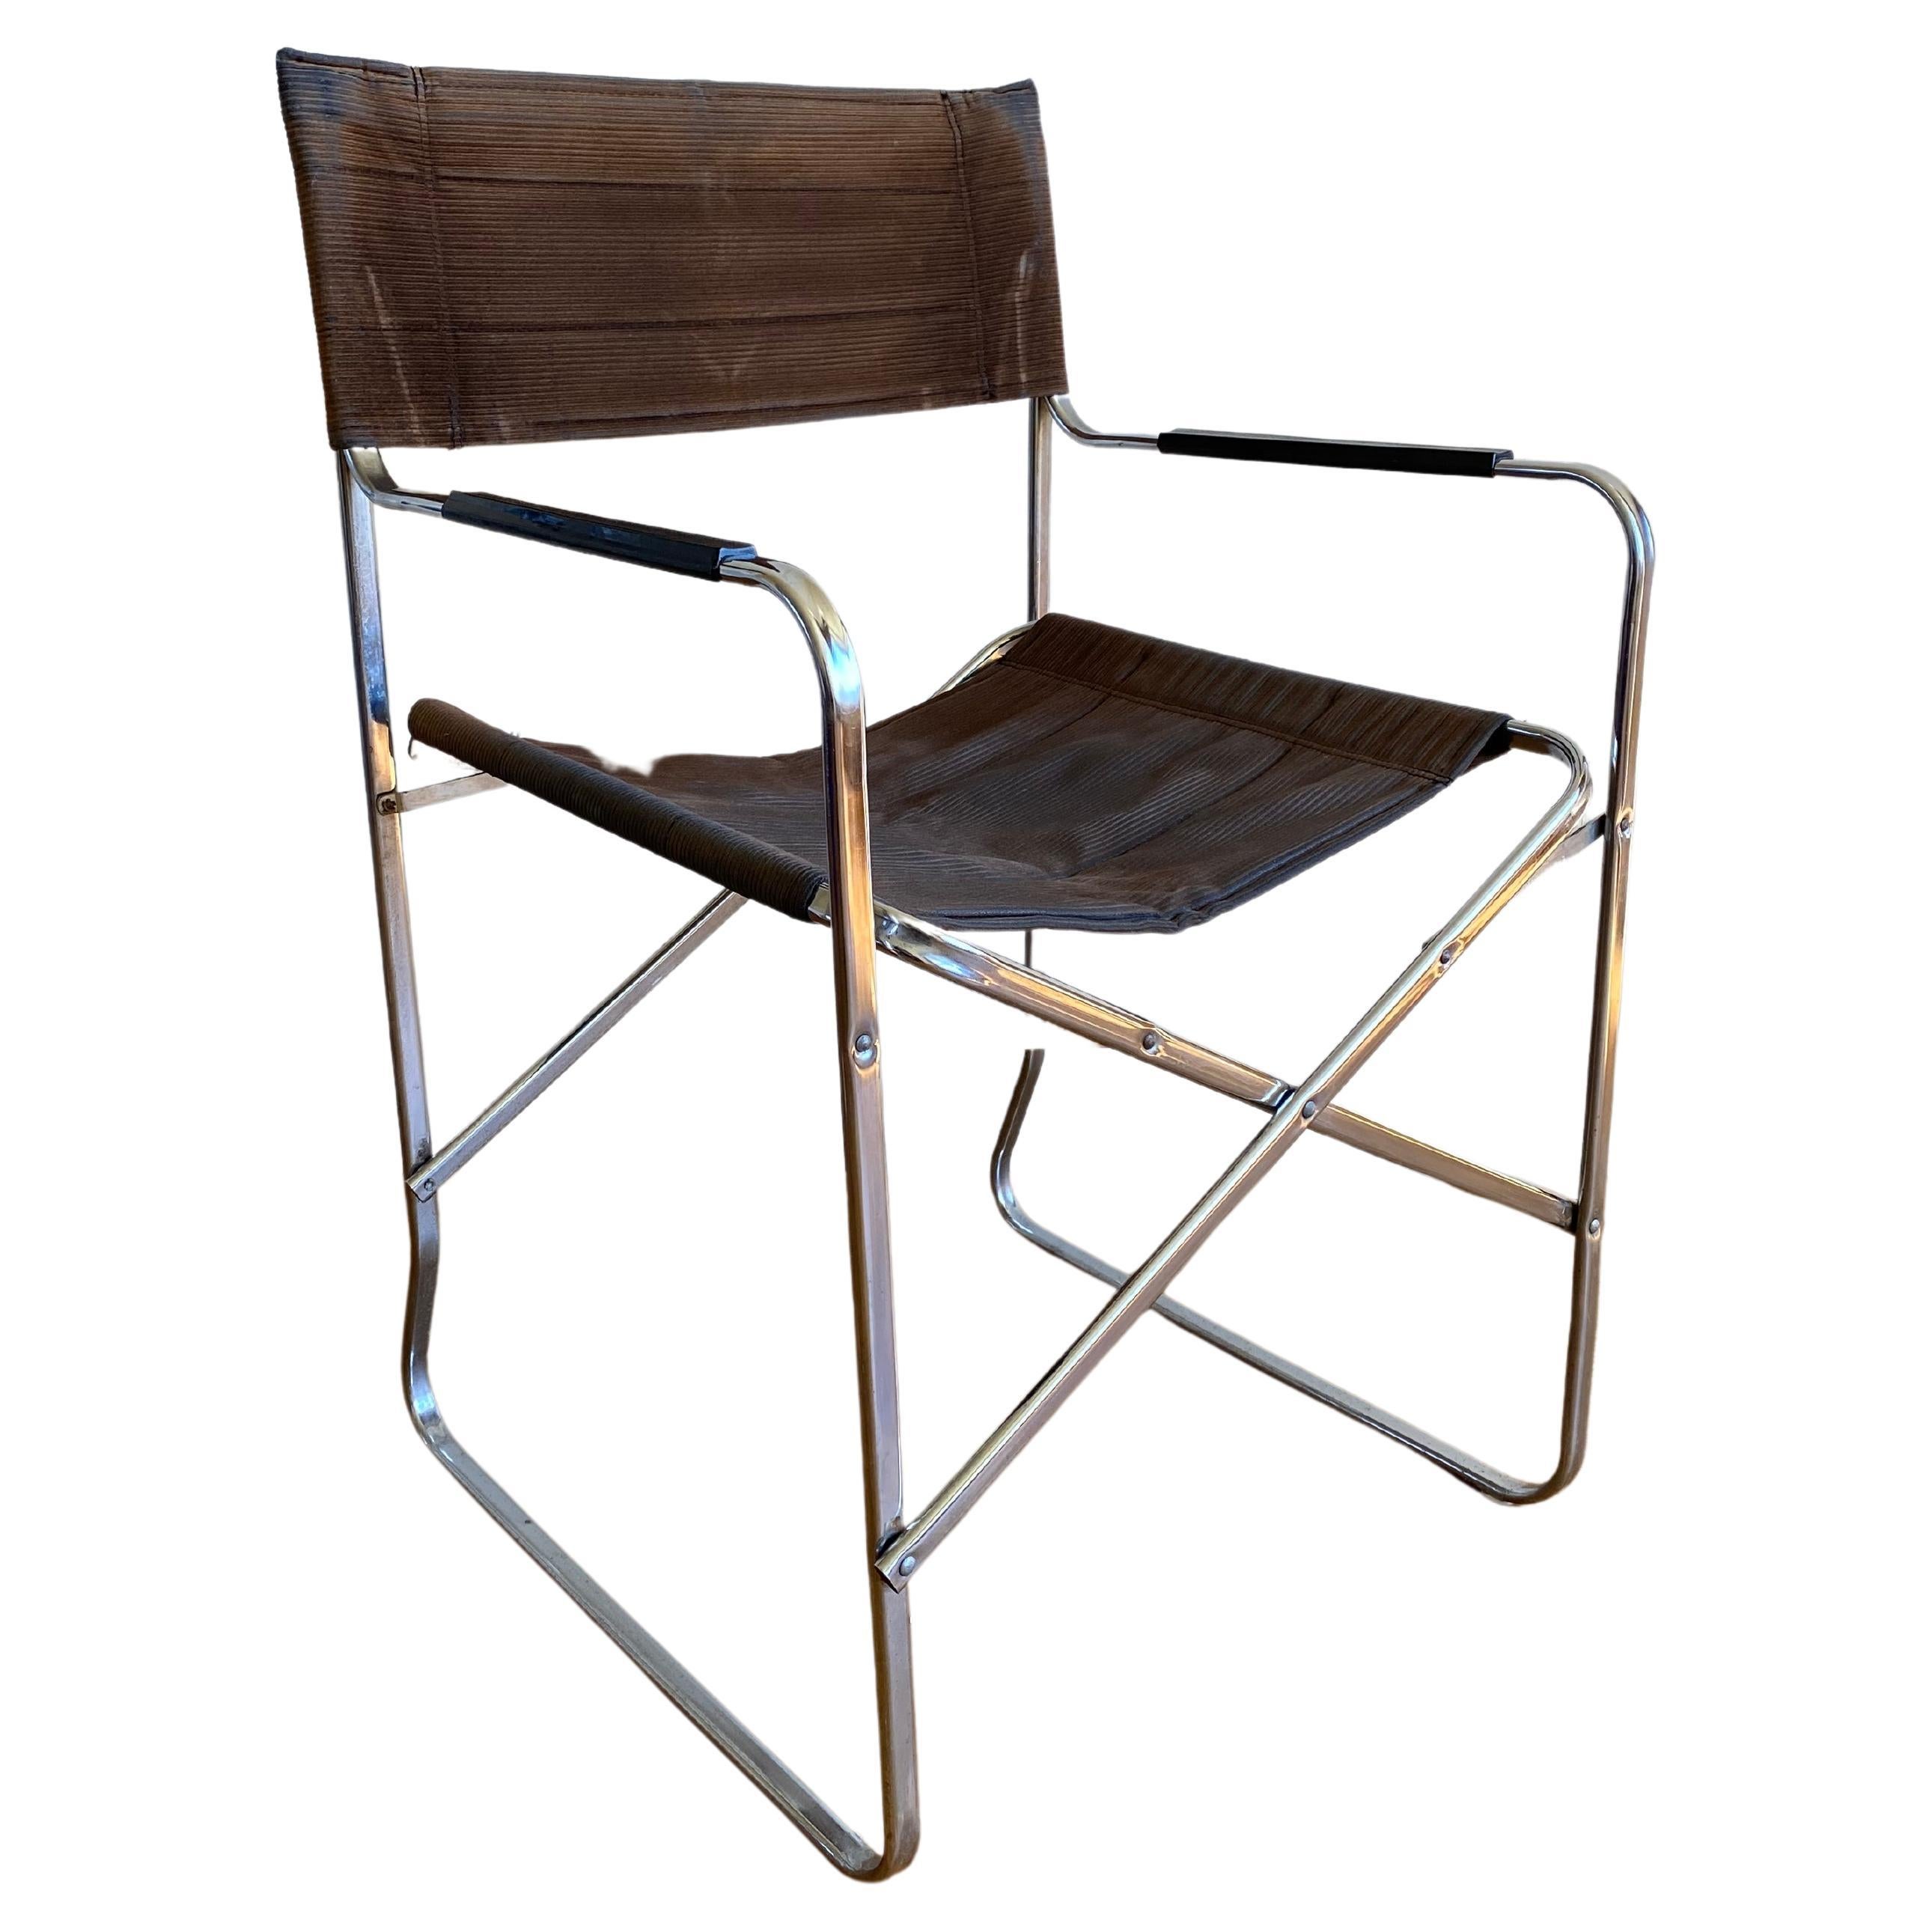 Mid-Century Modern Italian Folding Chair in Style of the Gae Aulenti April Chair For Sale